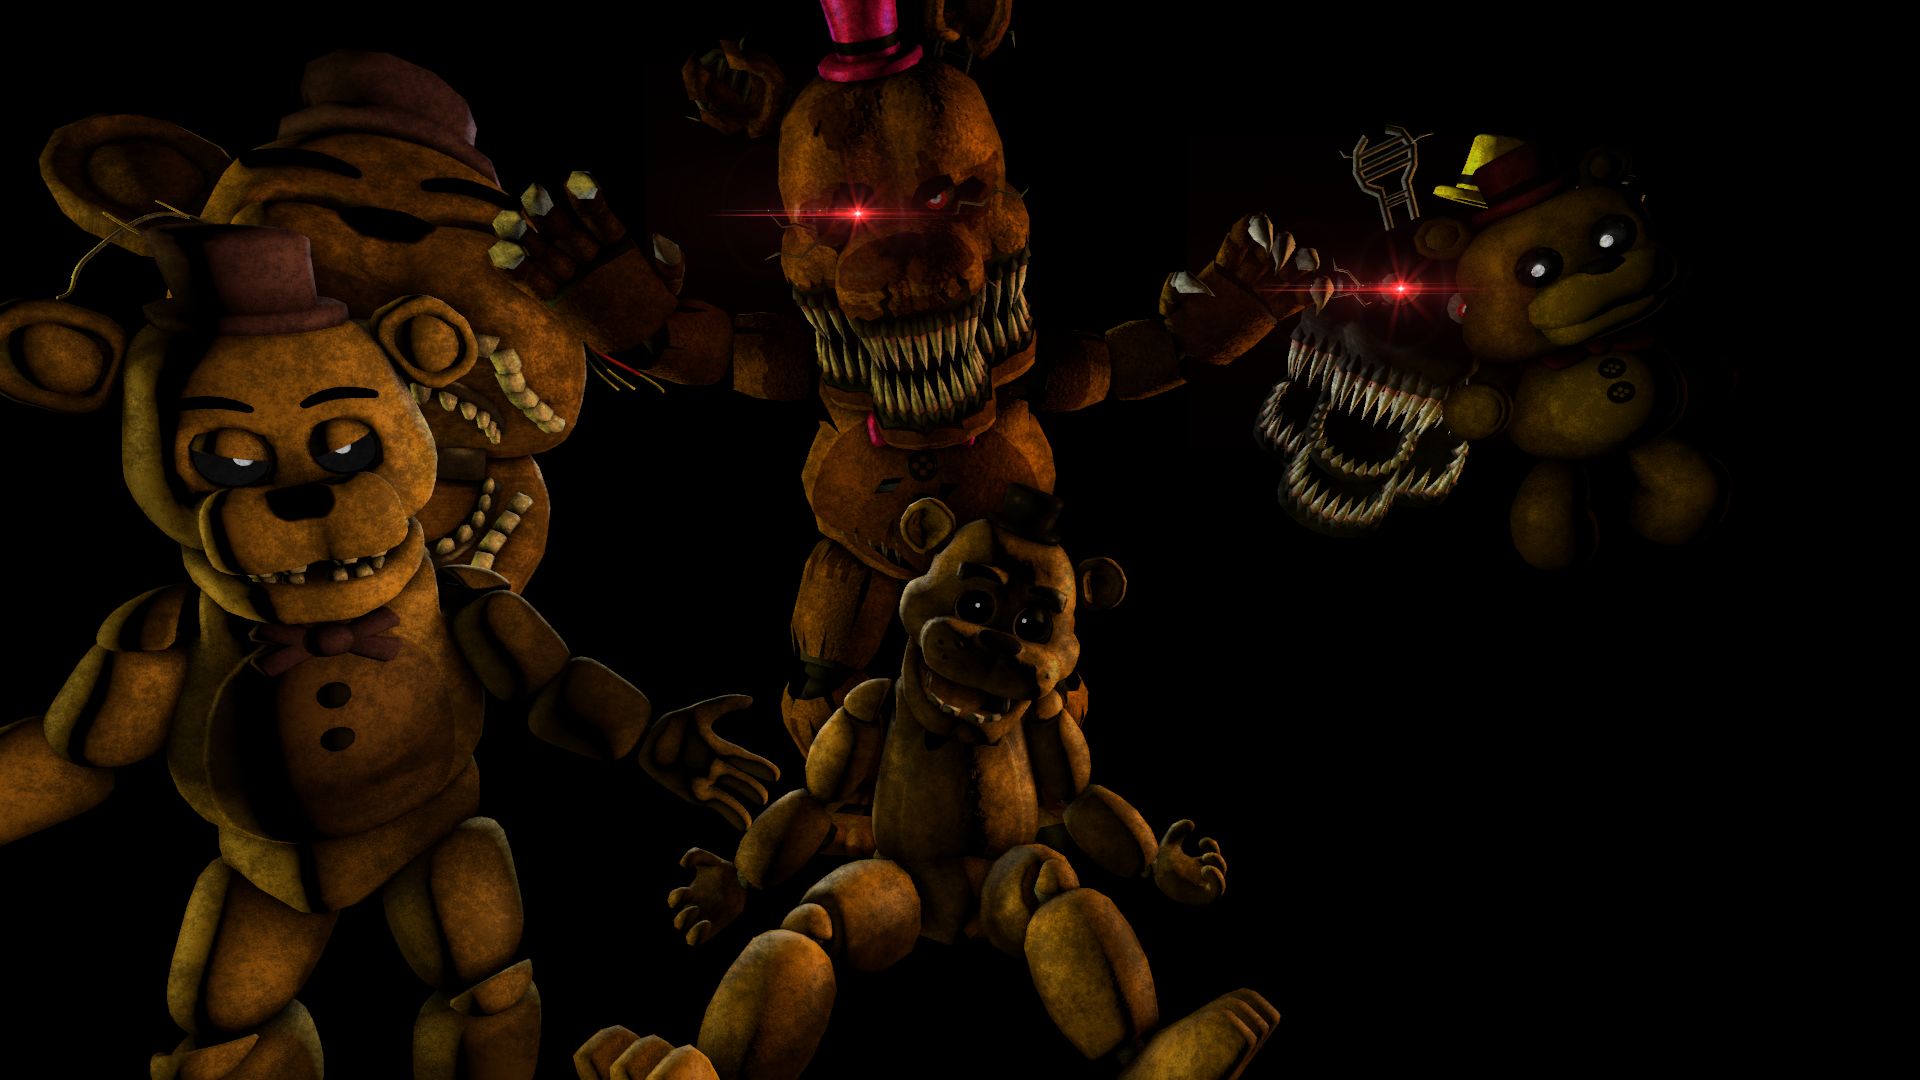 My fnaf wallpaper lol:3 XD and the nightmares